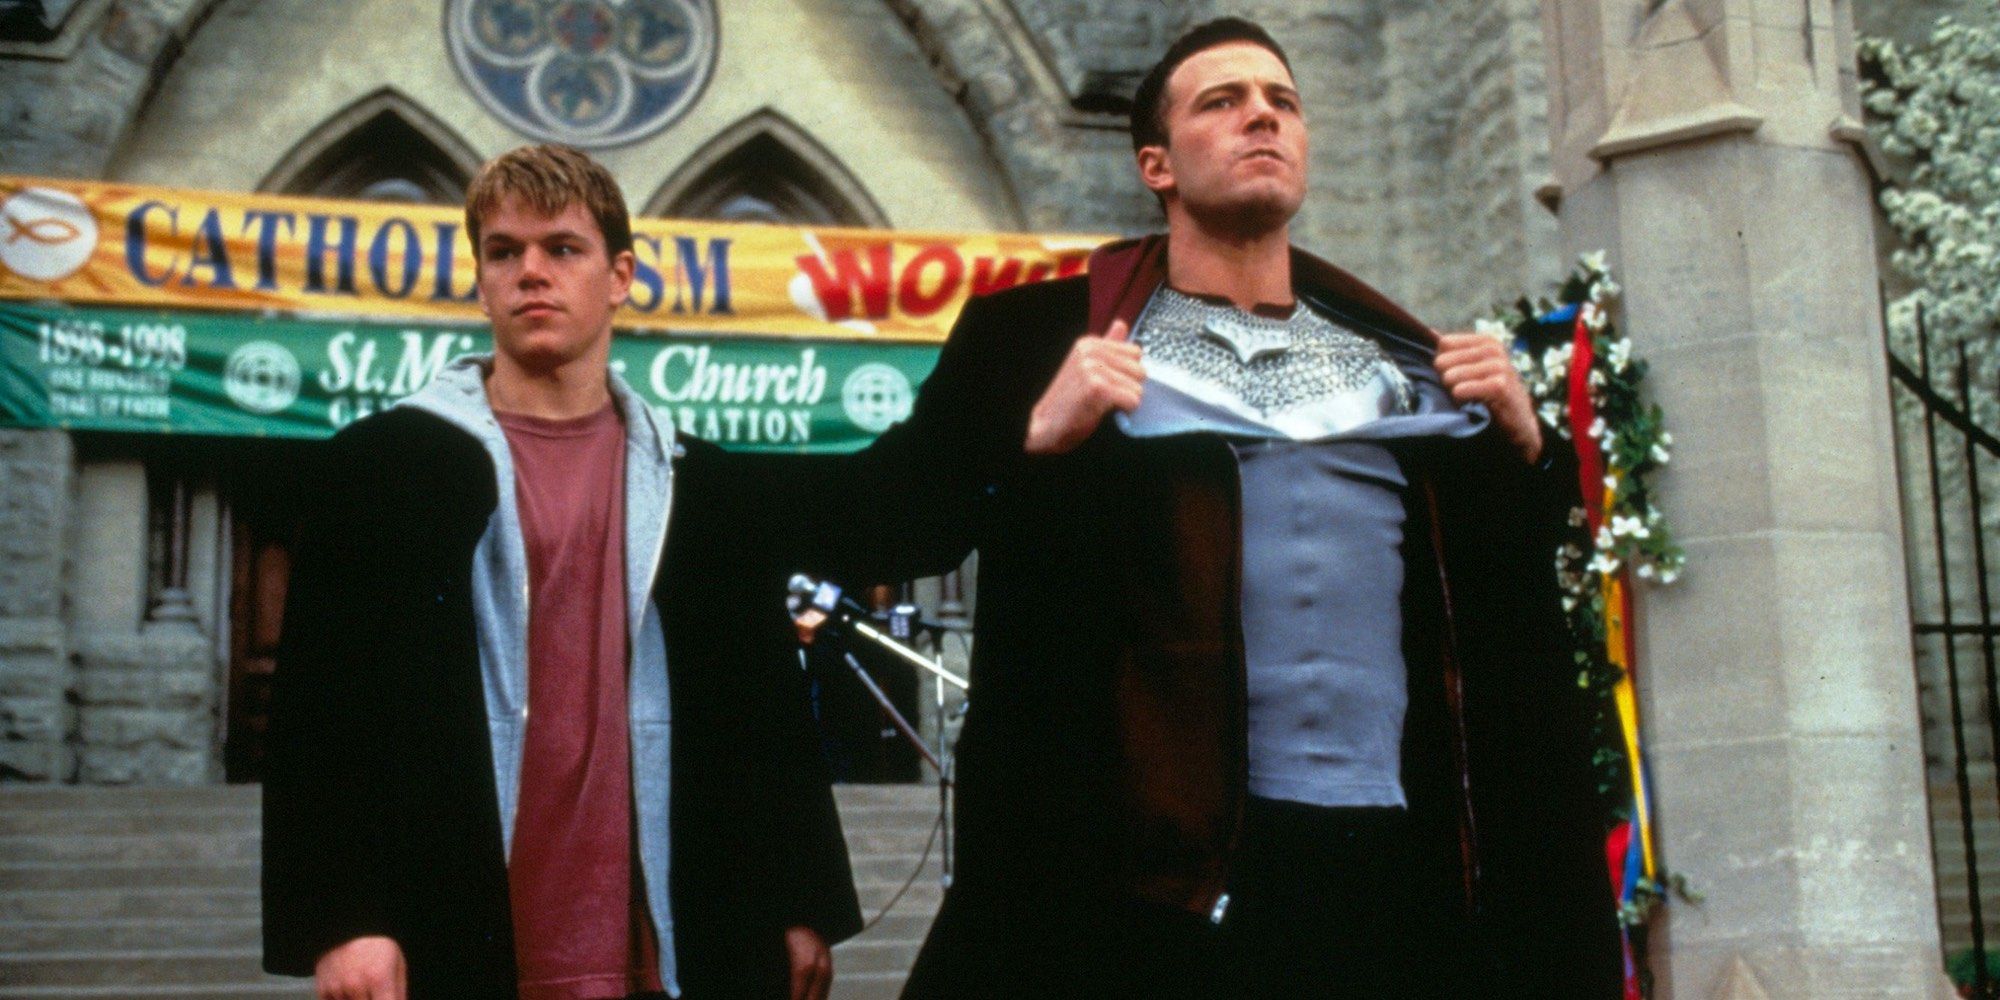 Matt Damon and Ben Affleck pose in front of a church in Dogma